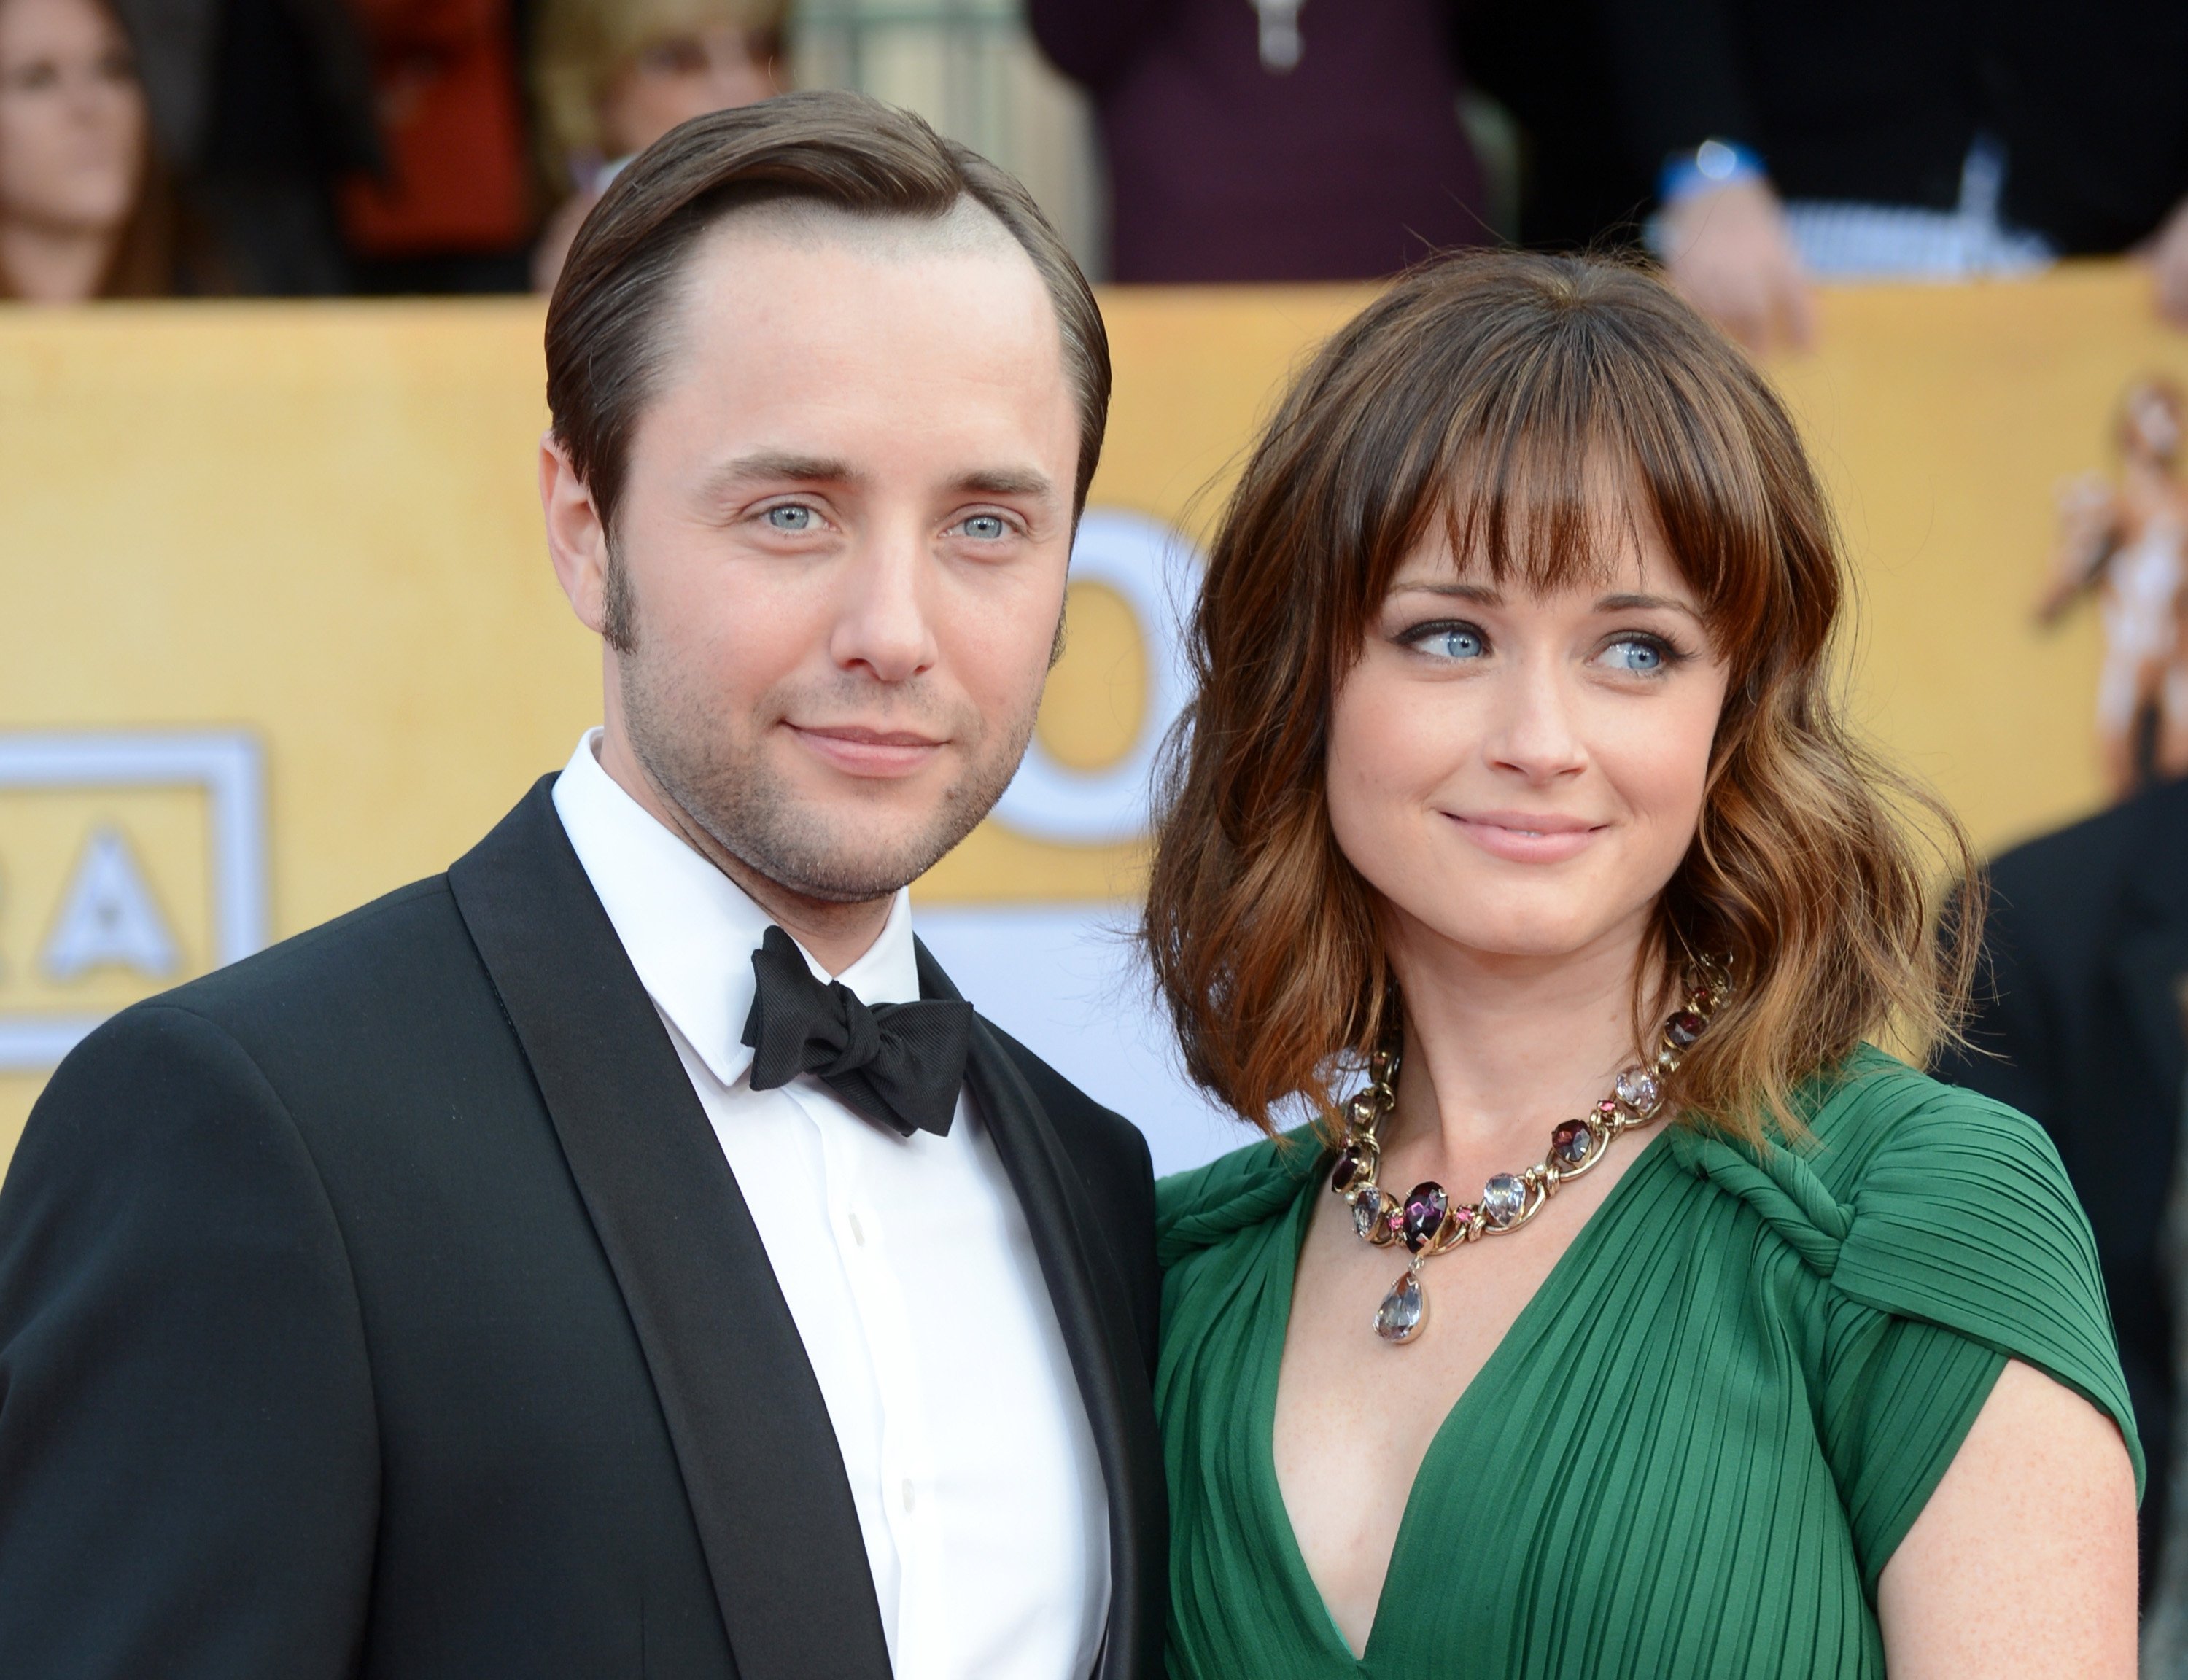 Vincent Kartheiser and Alexis Bledel arrive at the 19th Annual Screen Actors Guild Awards 